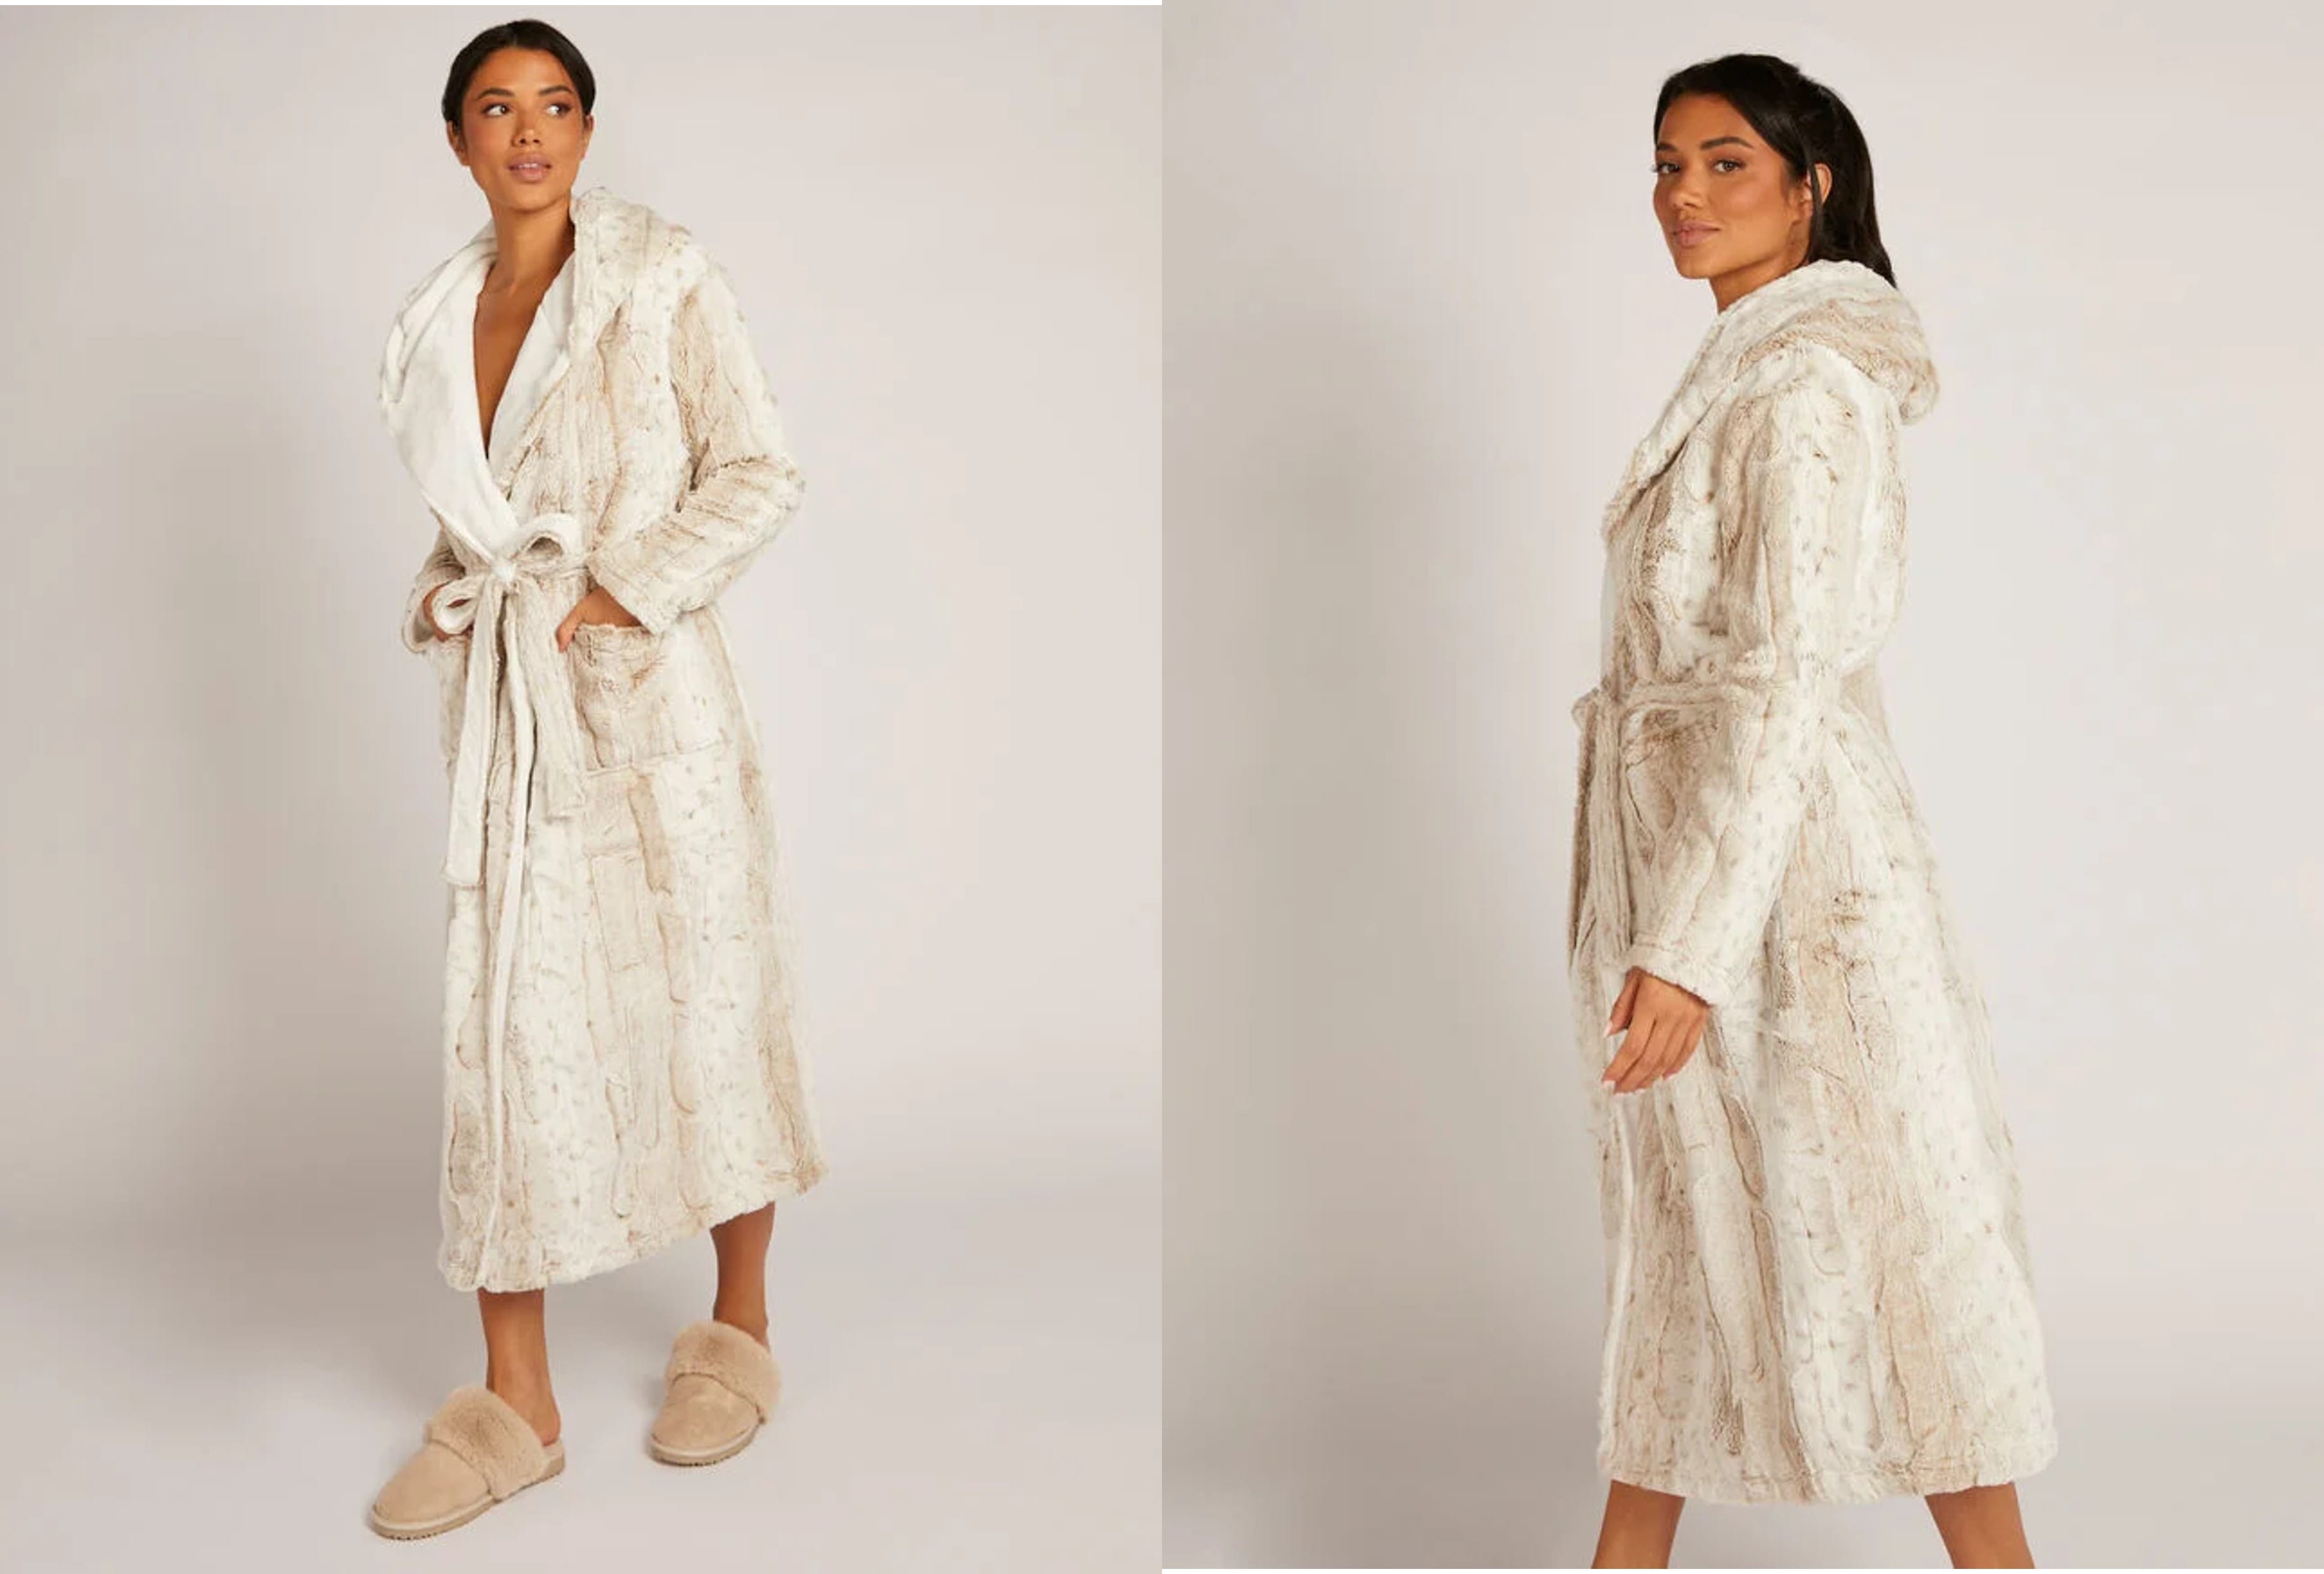 Winter Thermal Hooded Fleece Bathrobe For Men And Women Extra Long, Thick,  And Flannel Luxury Kimono Dressing Gown For Warmth And Style From Yuhuicuo,  $57.85 | DHgate.Com